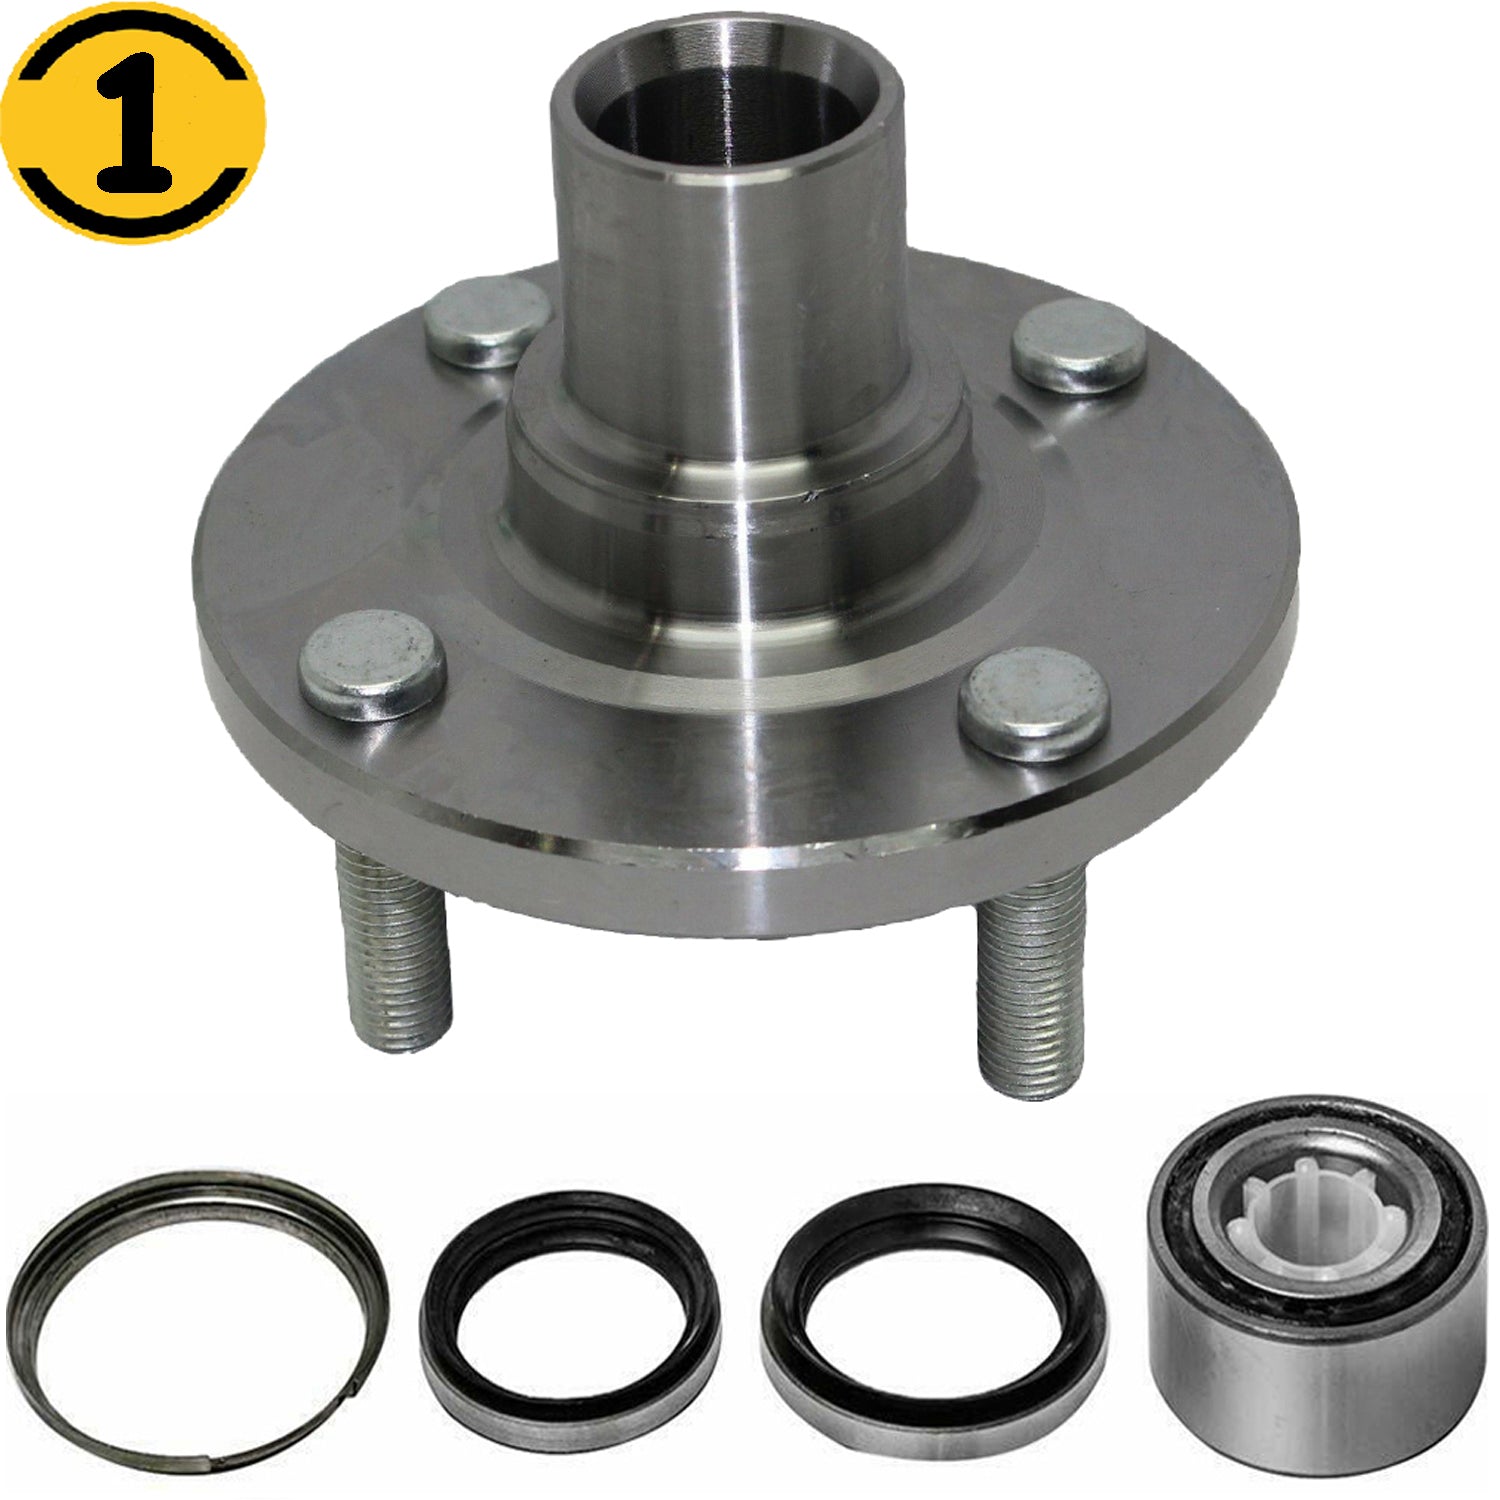 MotorbyMotor Front Wheel Bearing Hub Assembly Fits for 1988-2002 Toyota Corolla, for 1998-2002 Chevy Prizm,1993-1997 GEO Prizm Hub Bearing w/4 Lugs-518507 MotorbyMotor